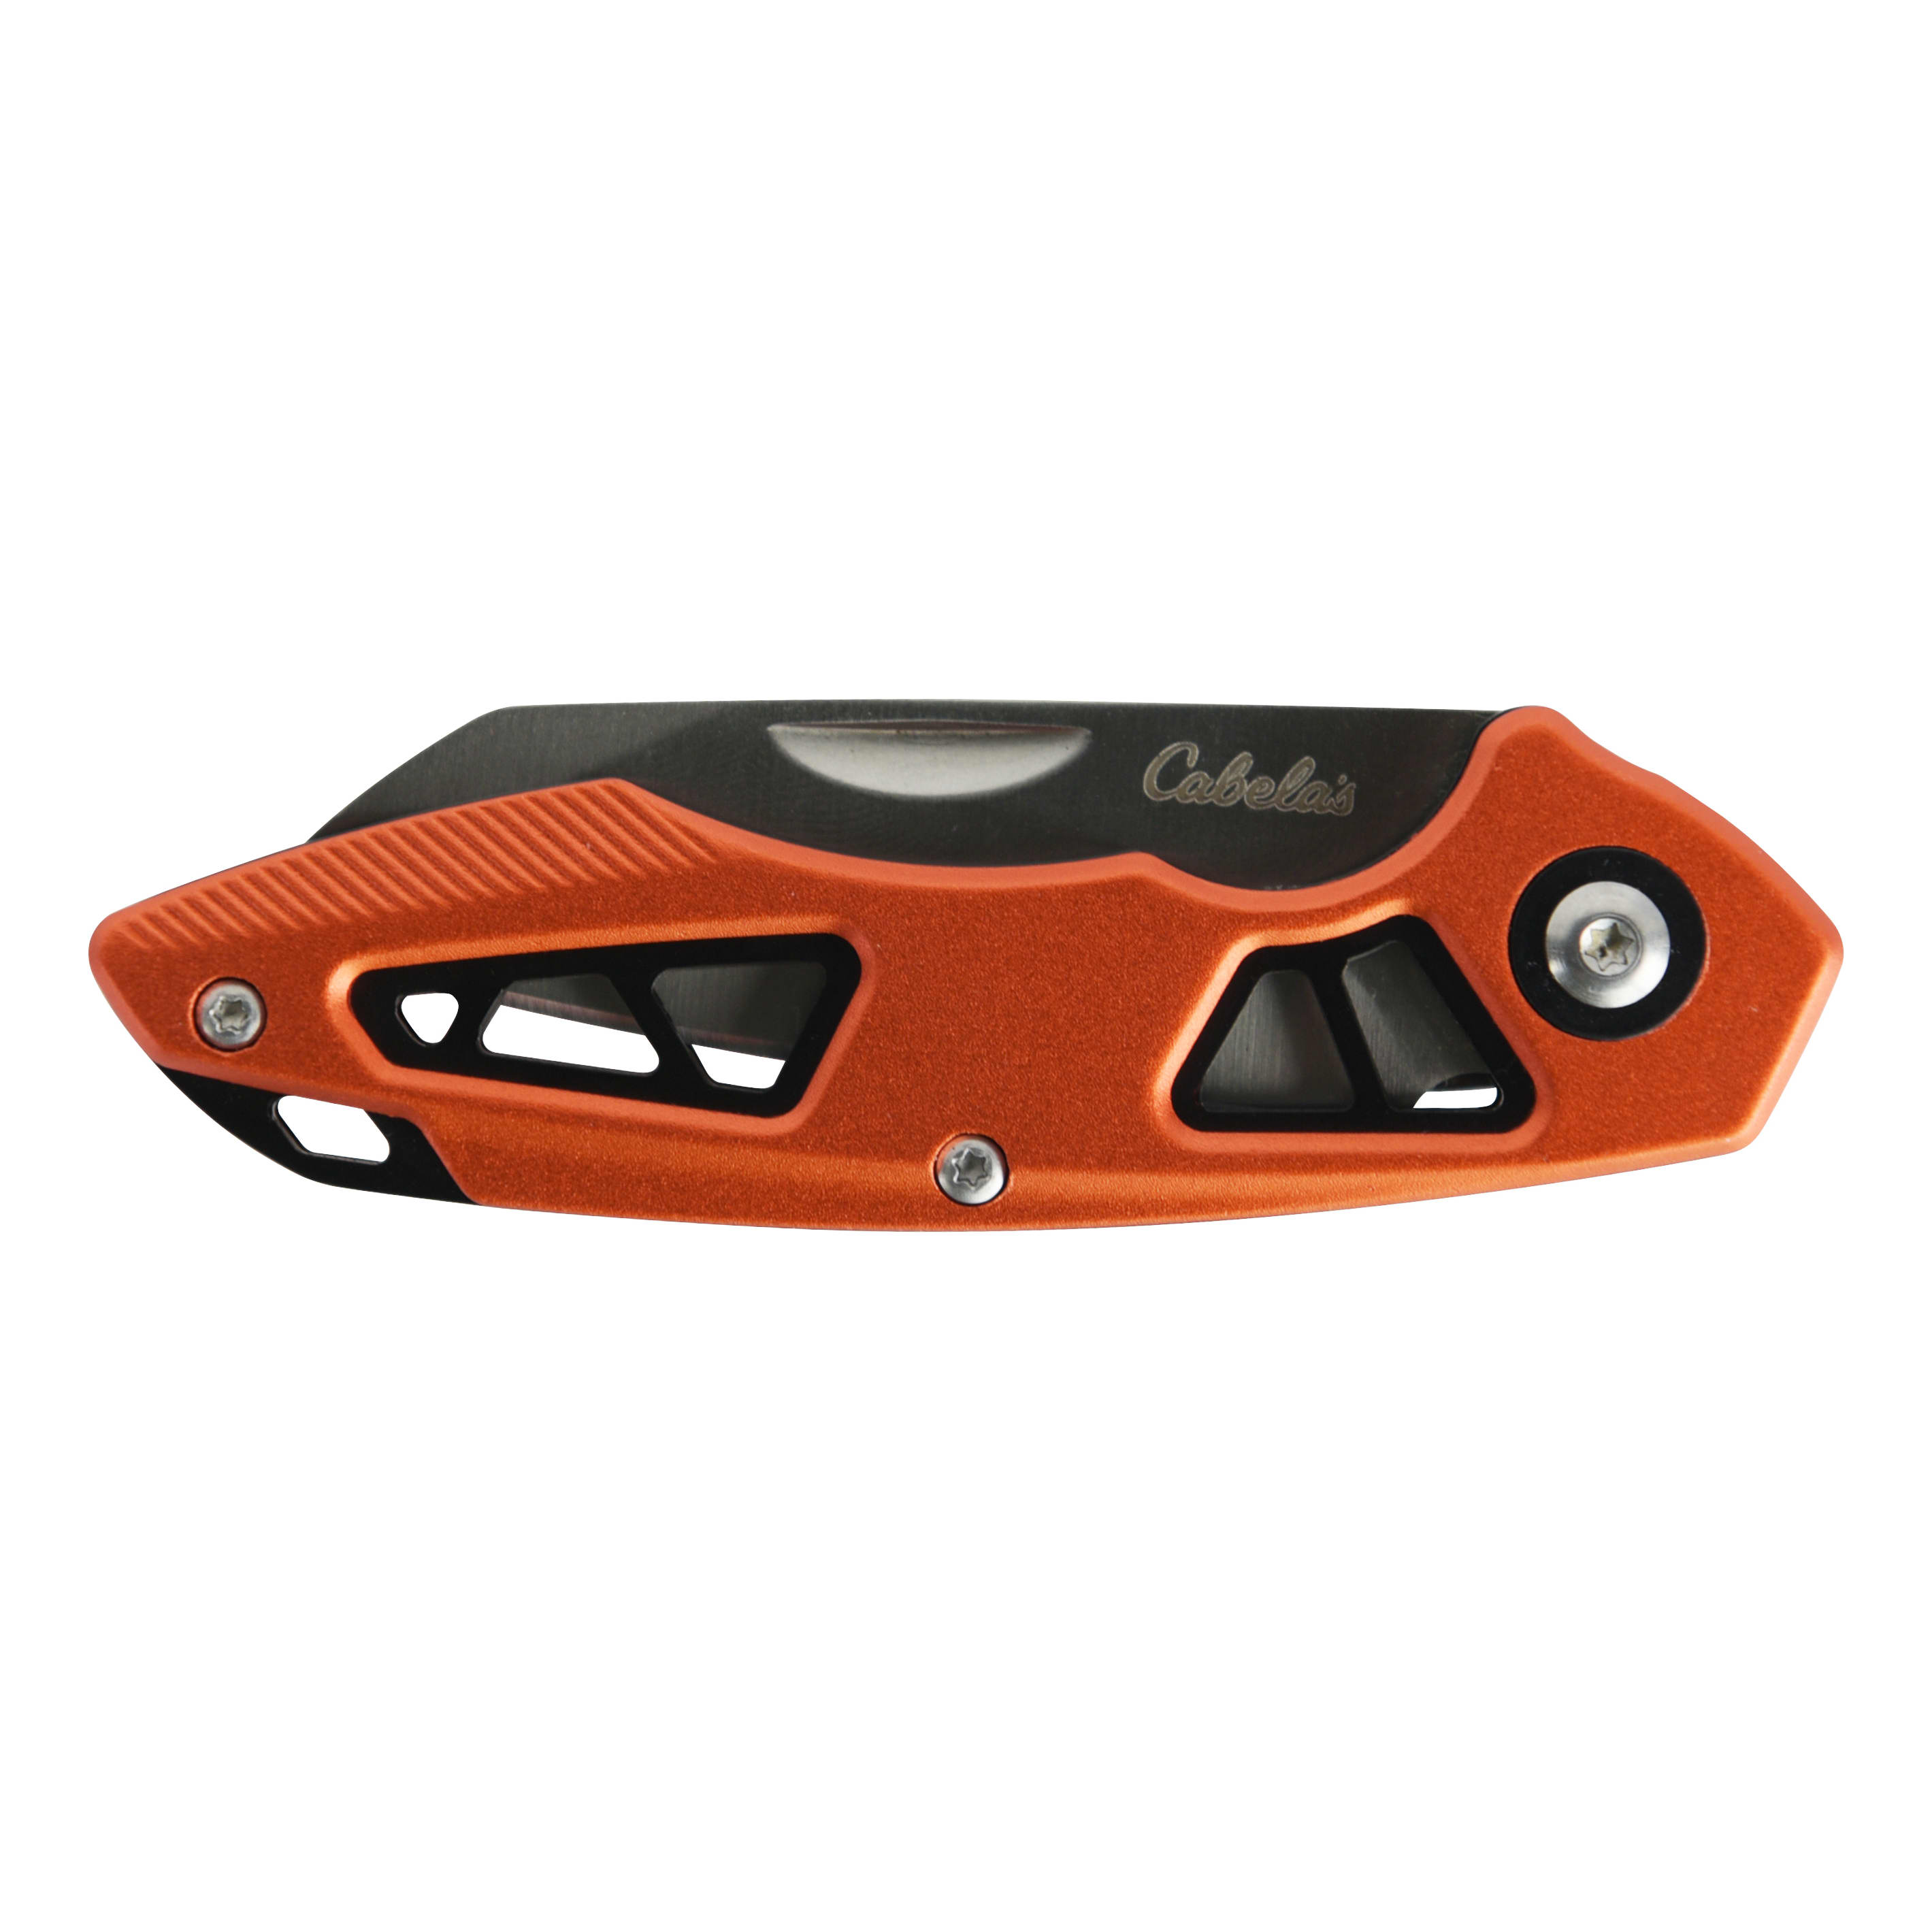 Cabela's Knife and Flashlight Combo with Waterproof Case - Orange - Knife - Close View